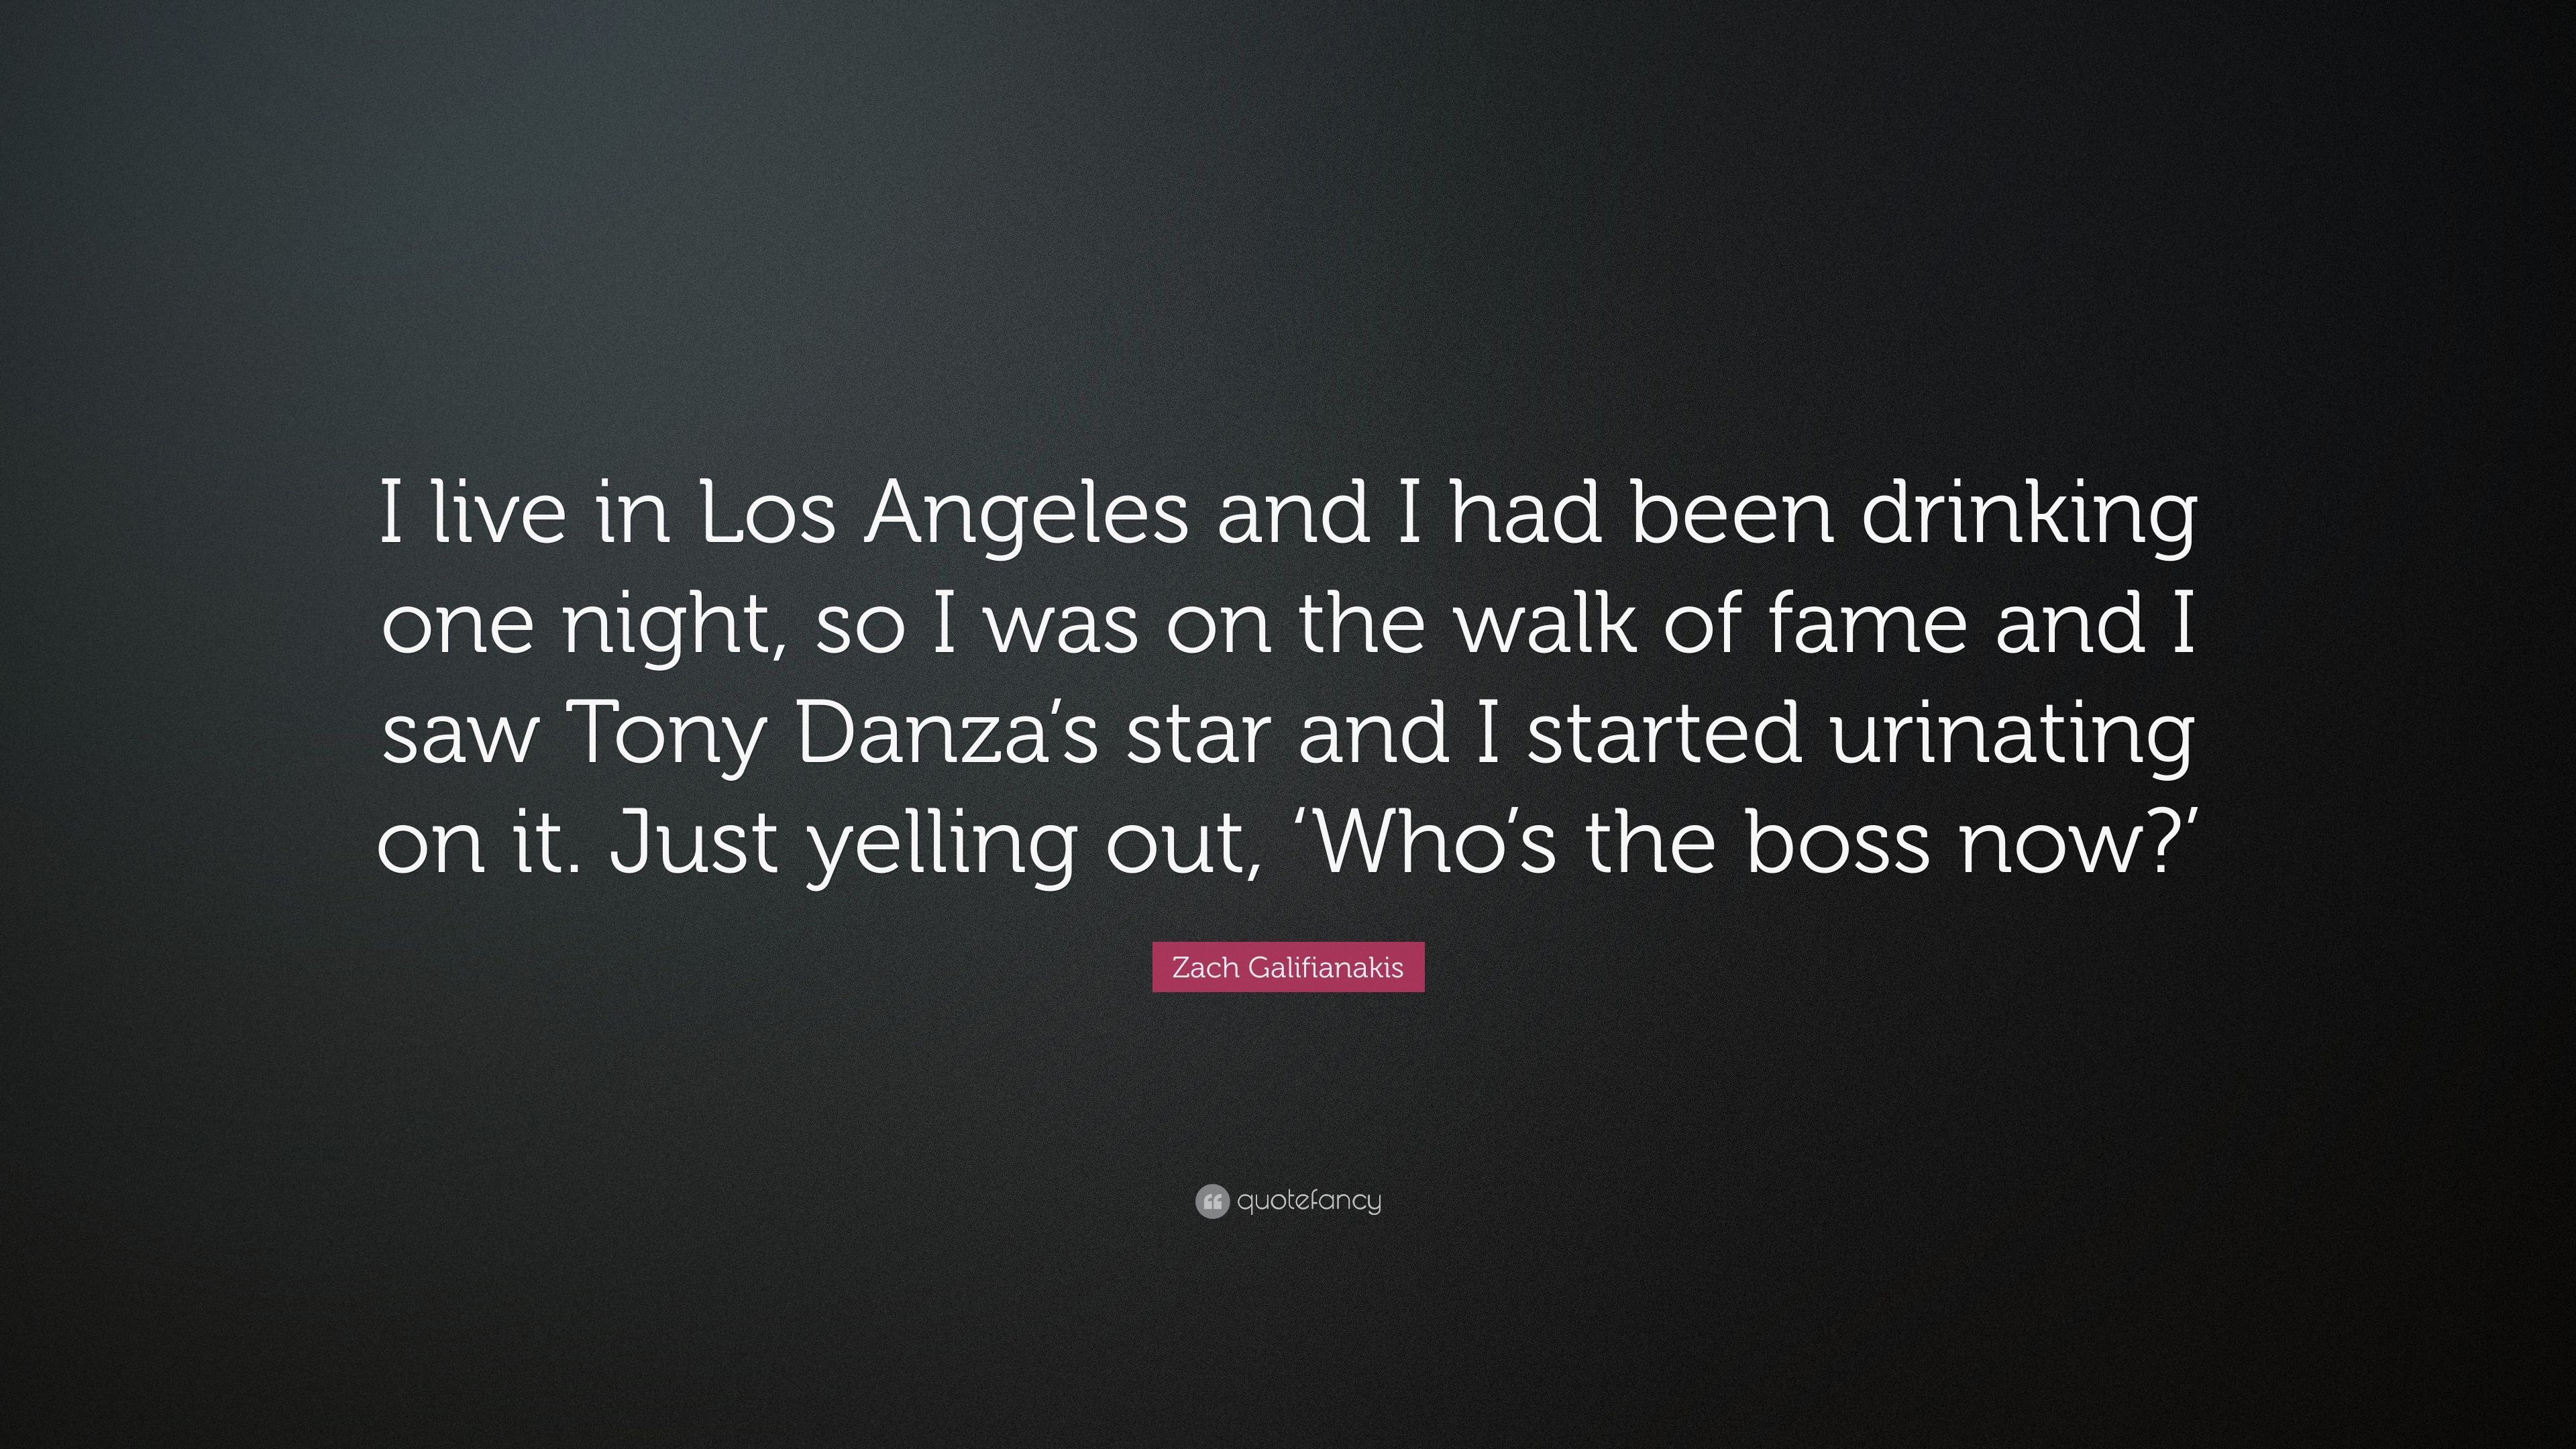 Zach Galifianakis Quote: "I live in Los Angeles and I had been 